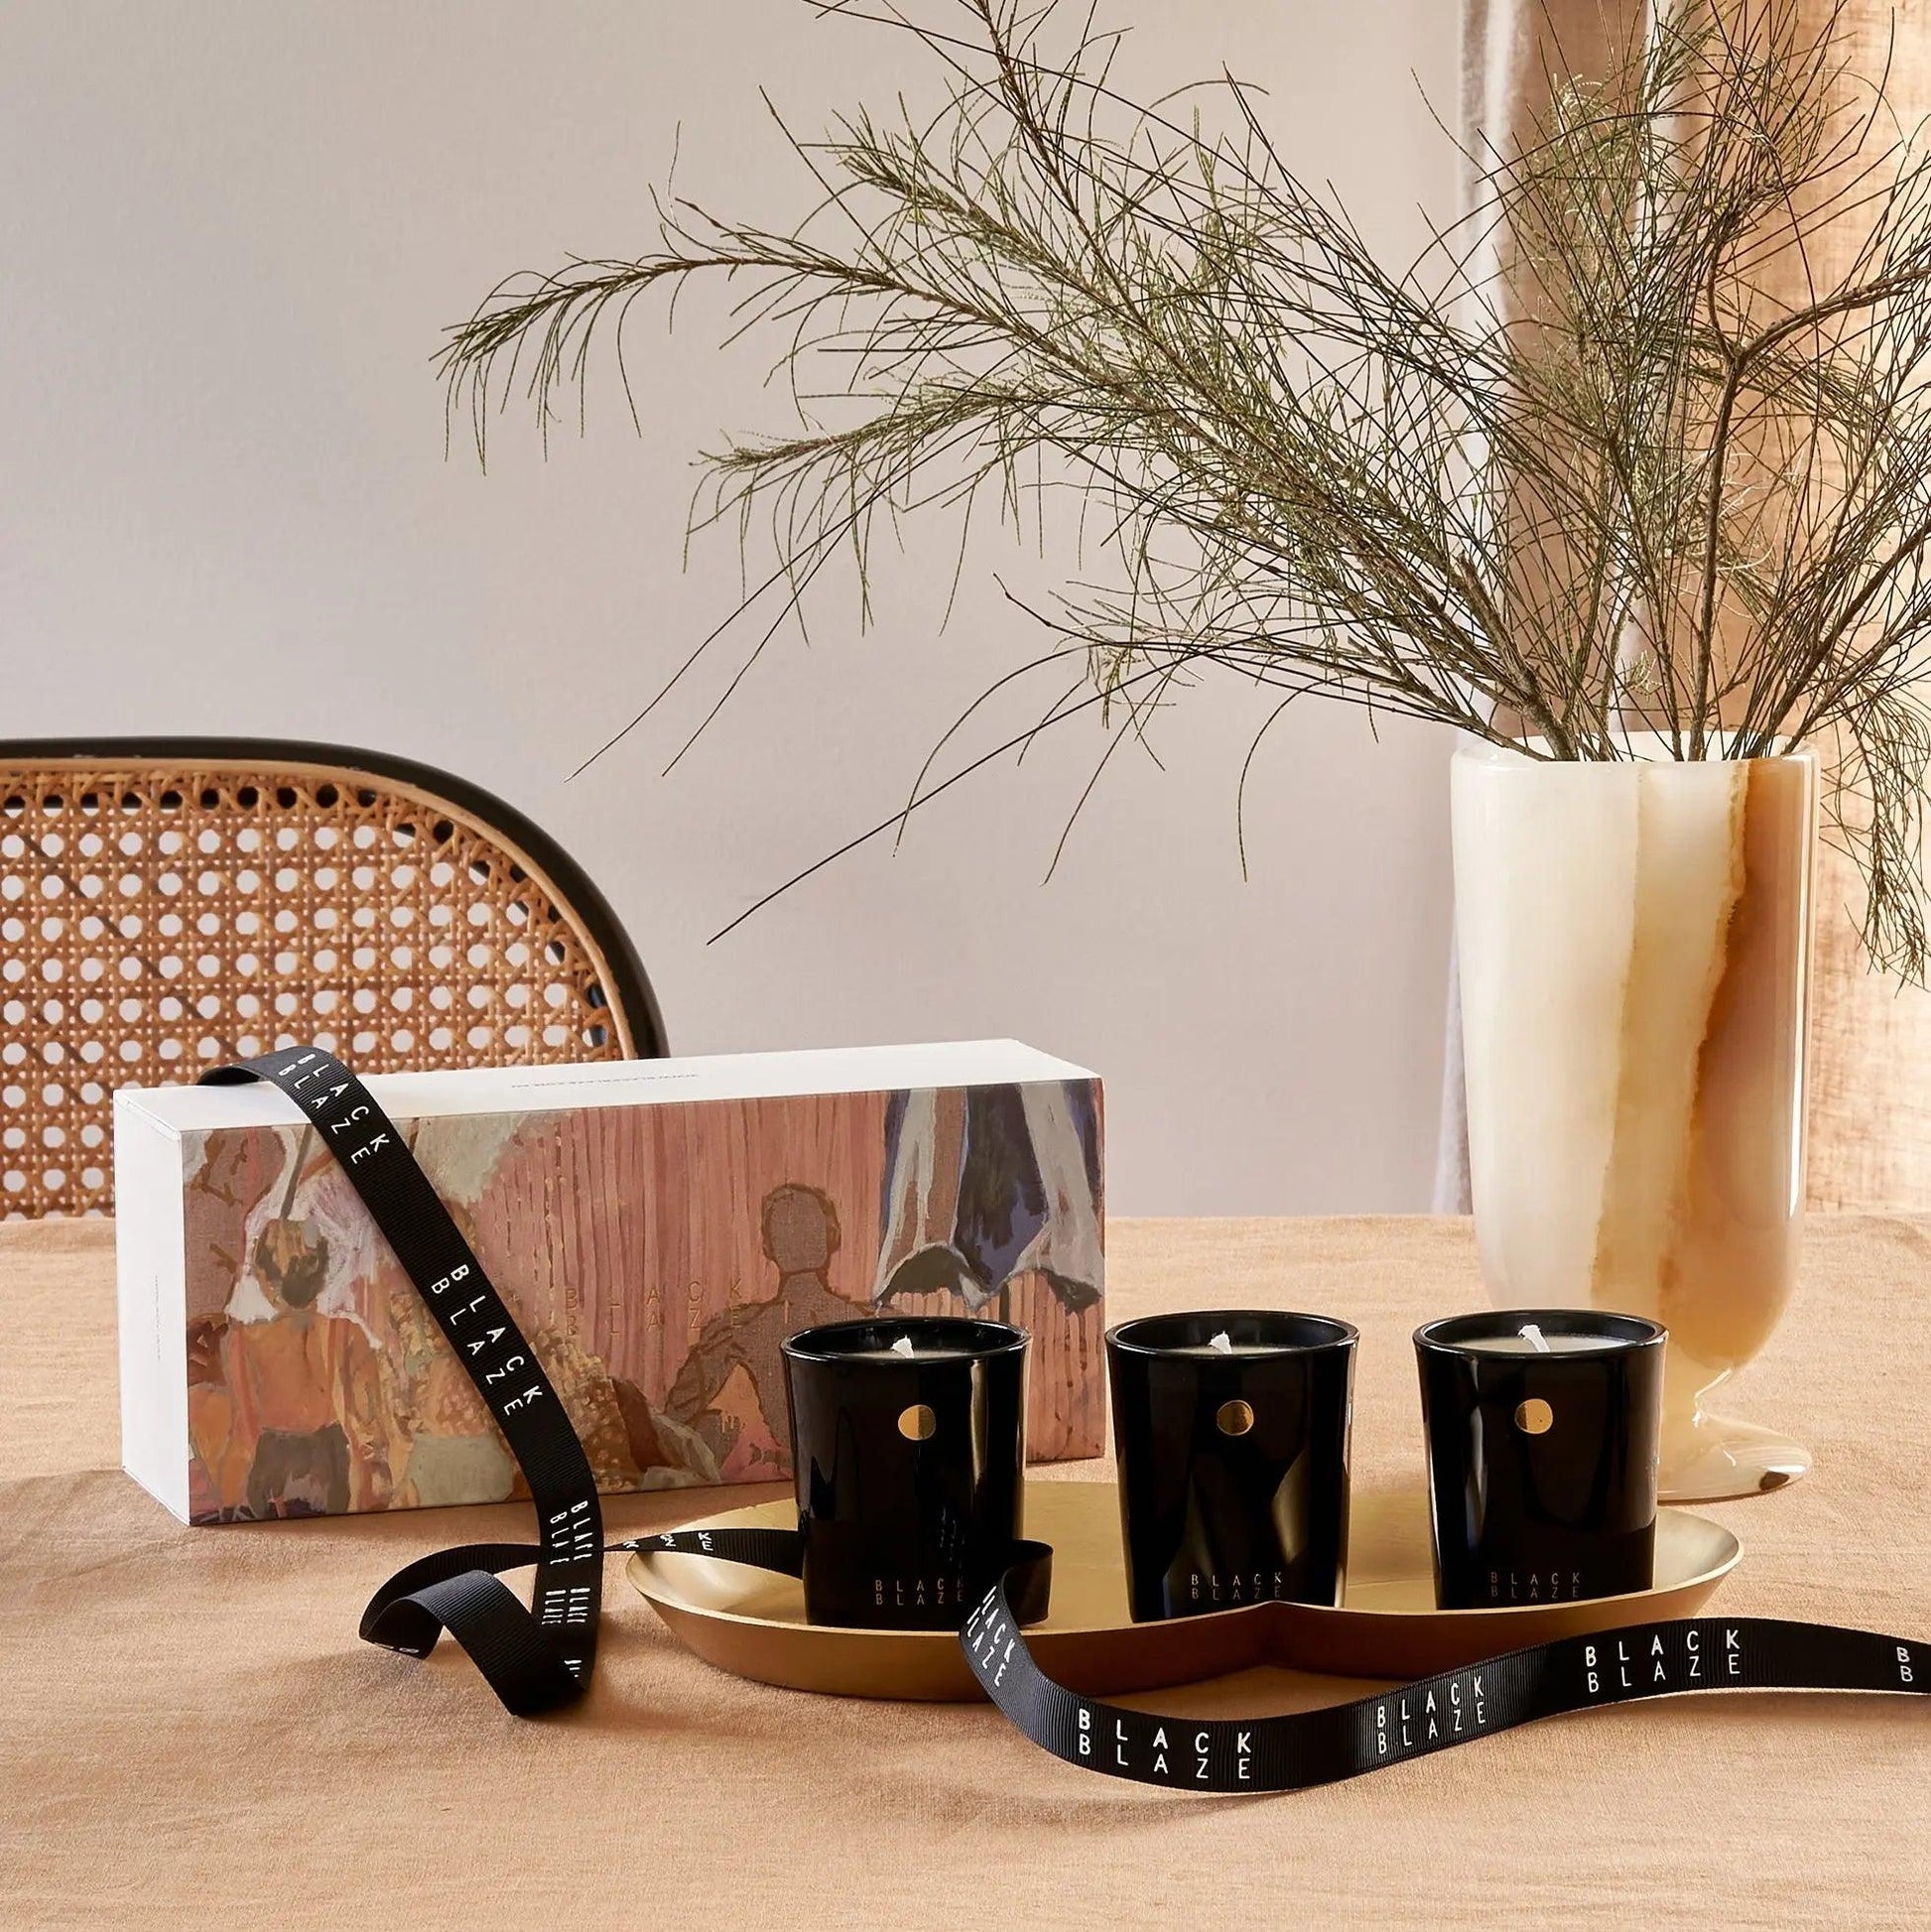 Scented Candle Trio- The Collector Set - BLACK BLAZE - THE GREAT OUTDOOR COLLECTION - BLACK BLAZE